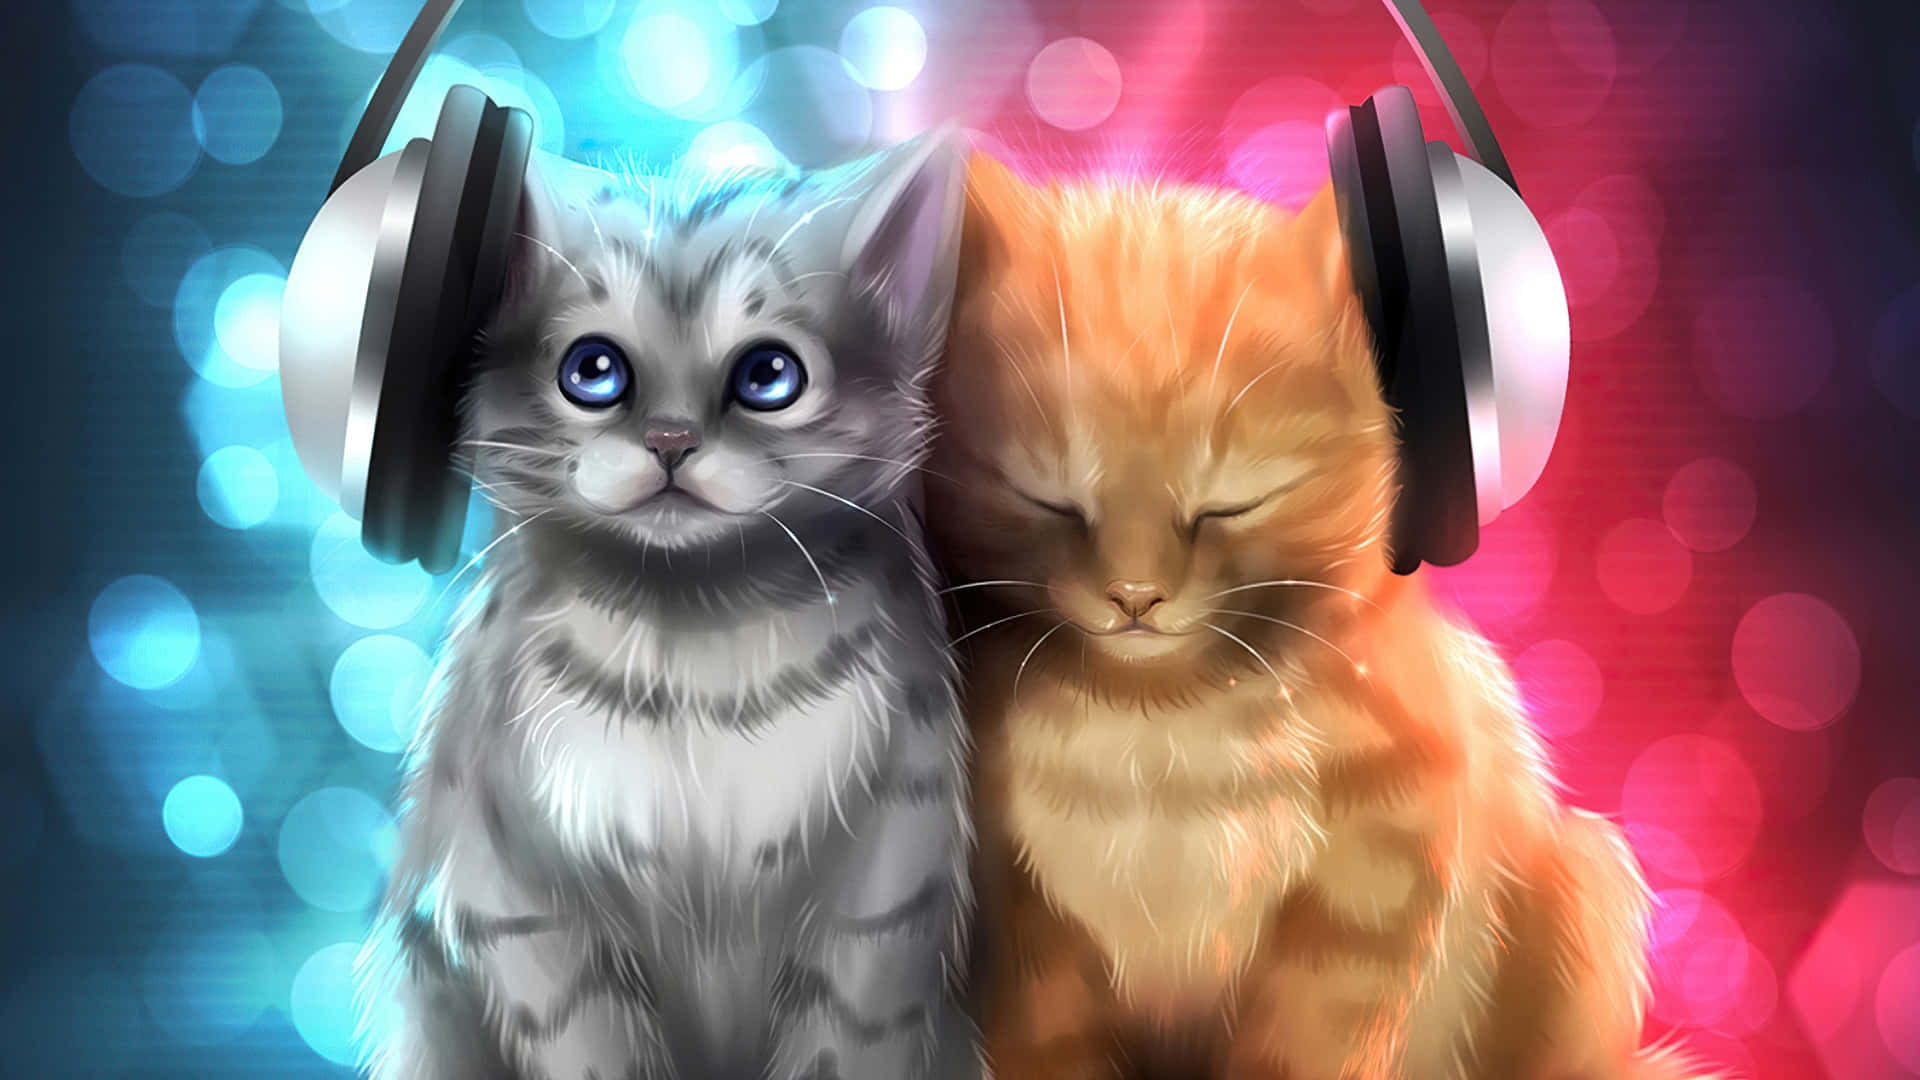 Two Cats With Headphones On Their Heads Wallpaper